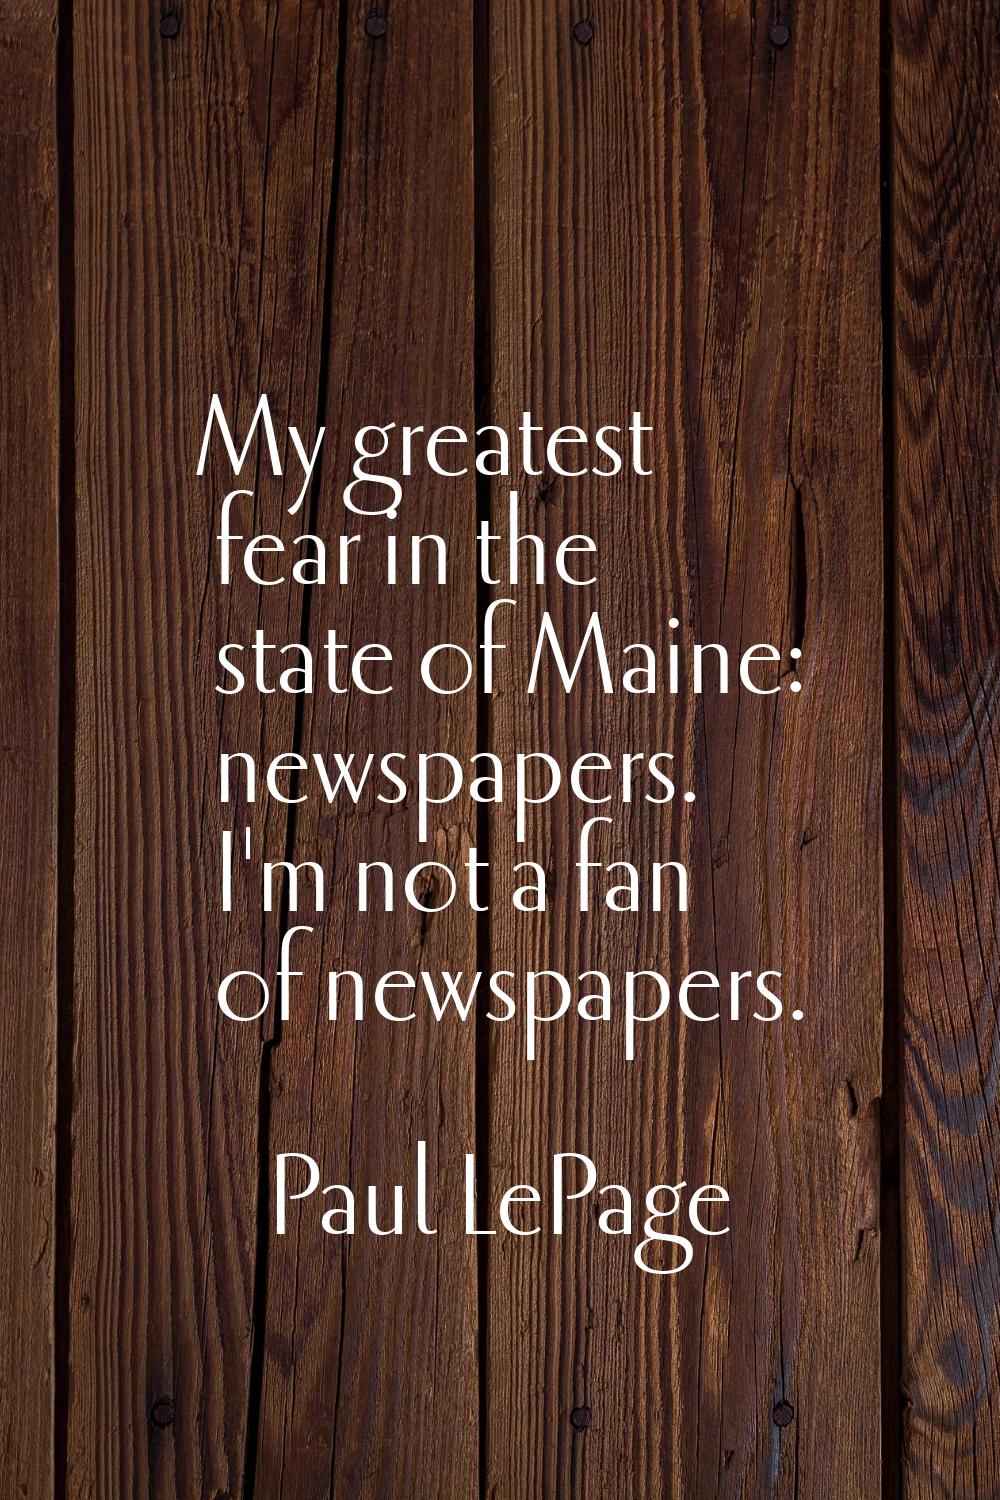 My greatest fear in the state of Maine: newspapers. I'm not a fan of newspapers.